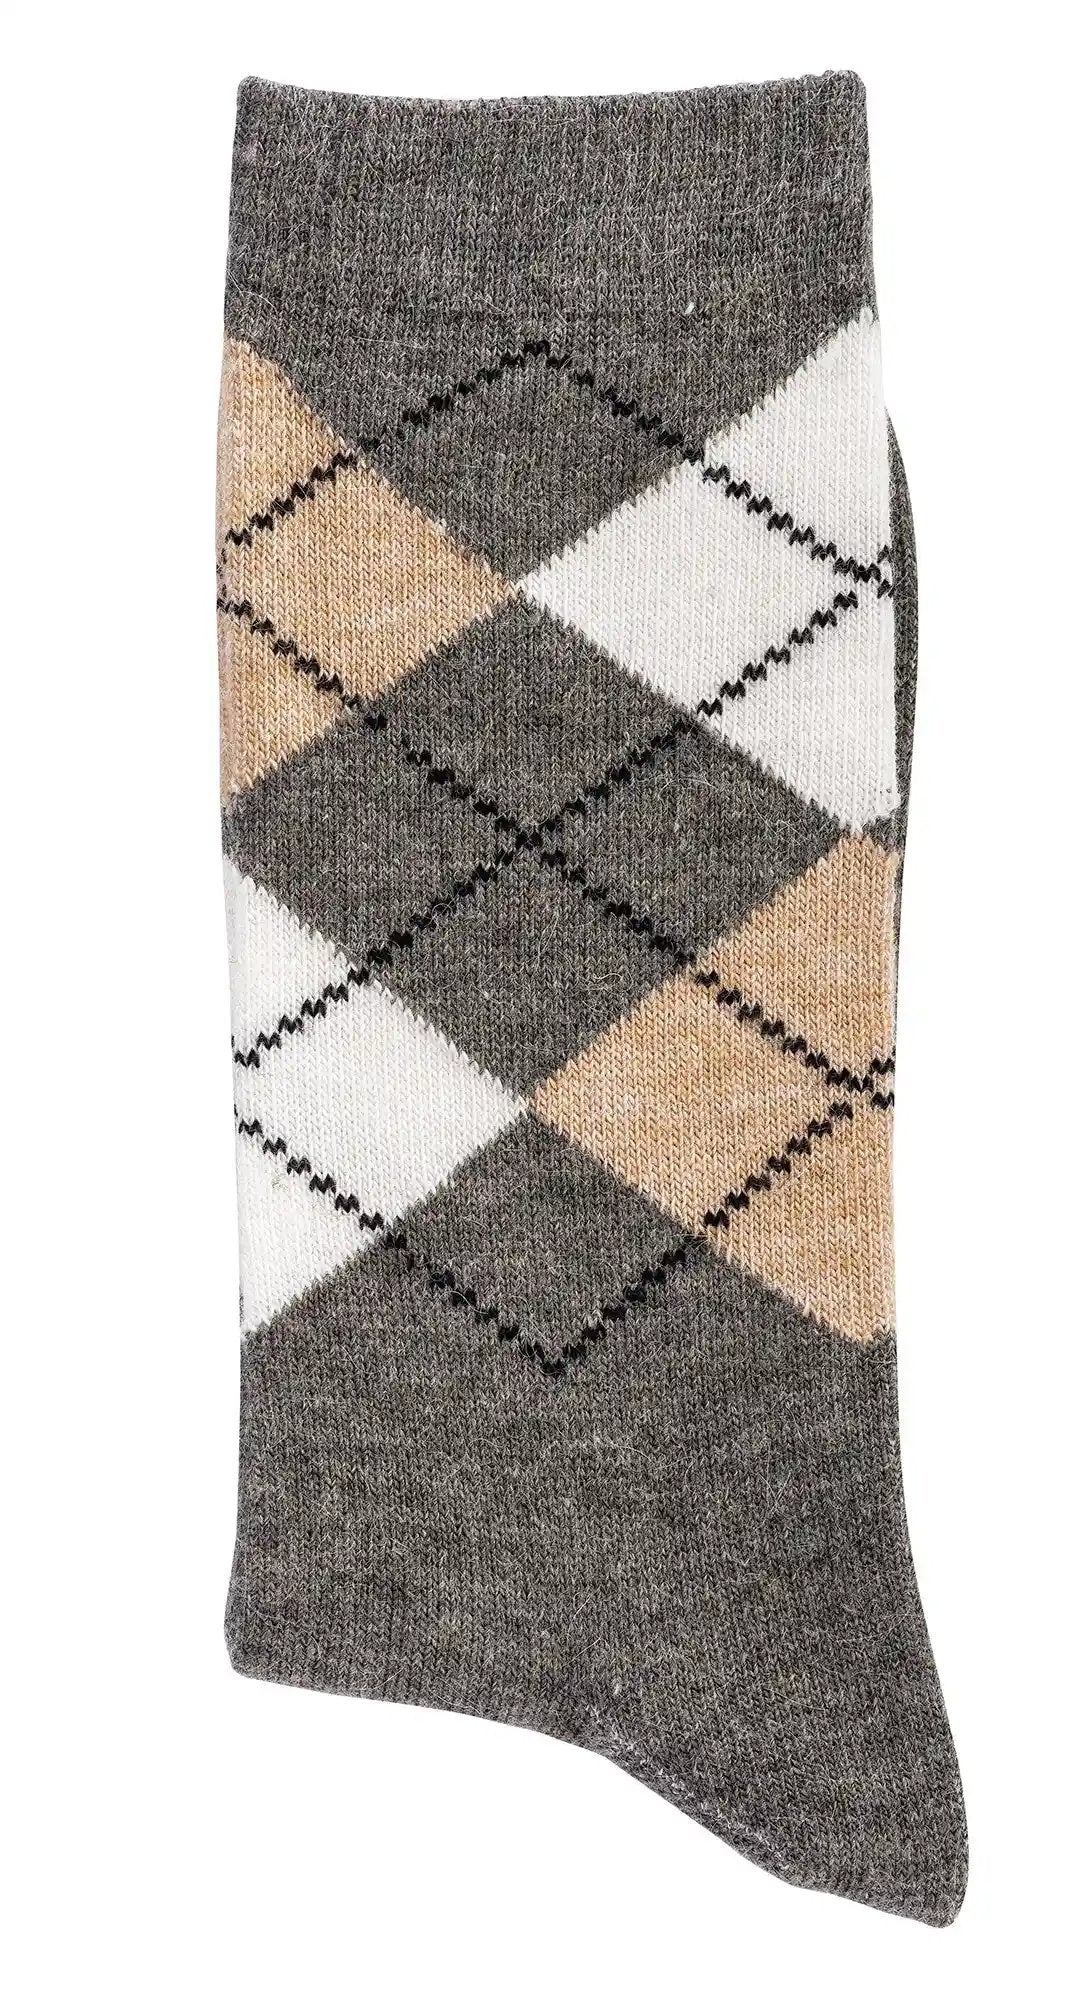 3 or 6 pairs of checked socks with alpaca wool for men and women